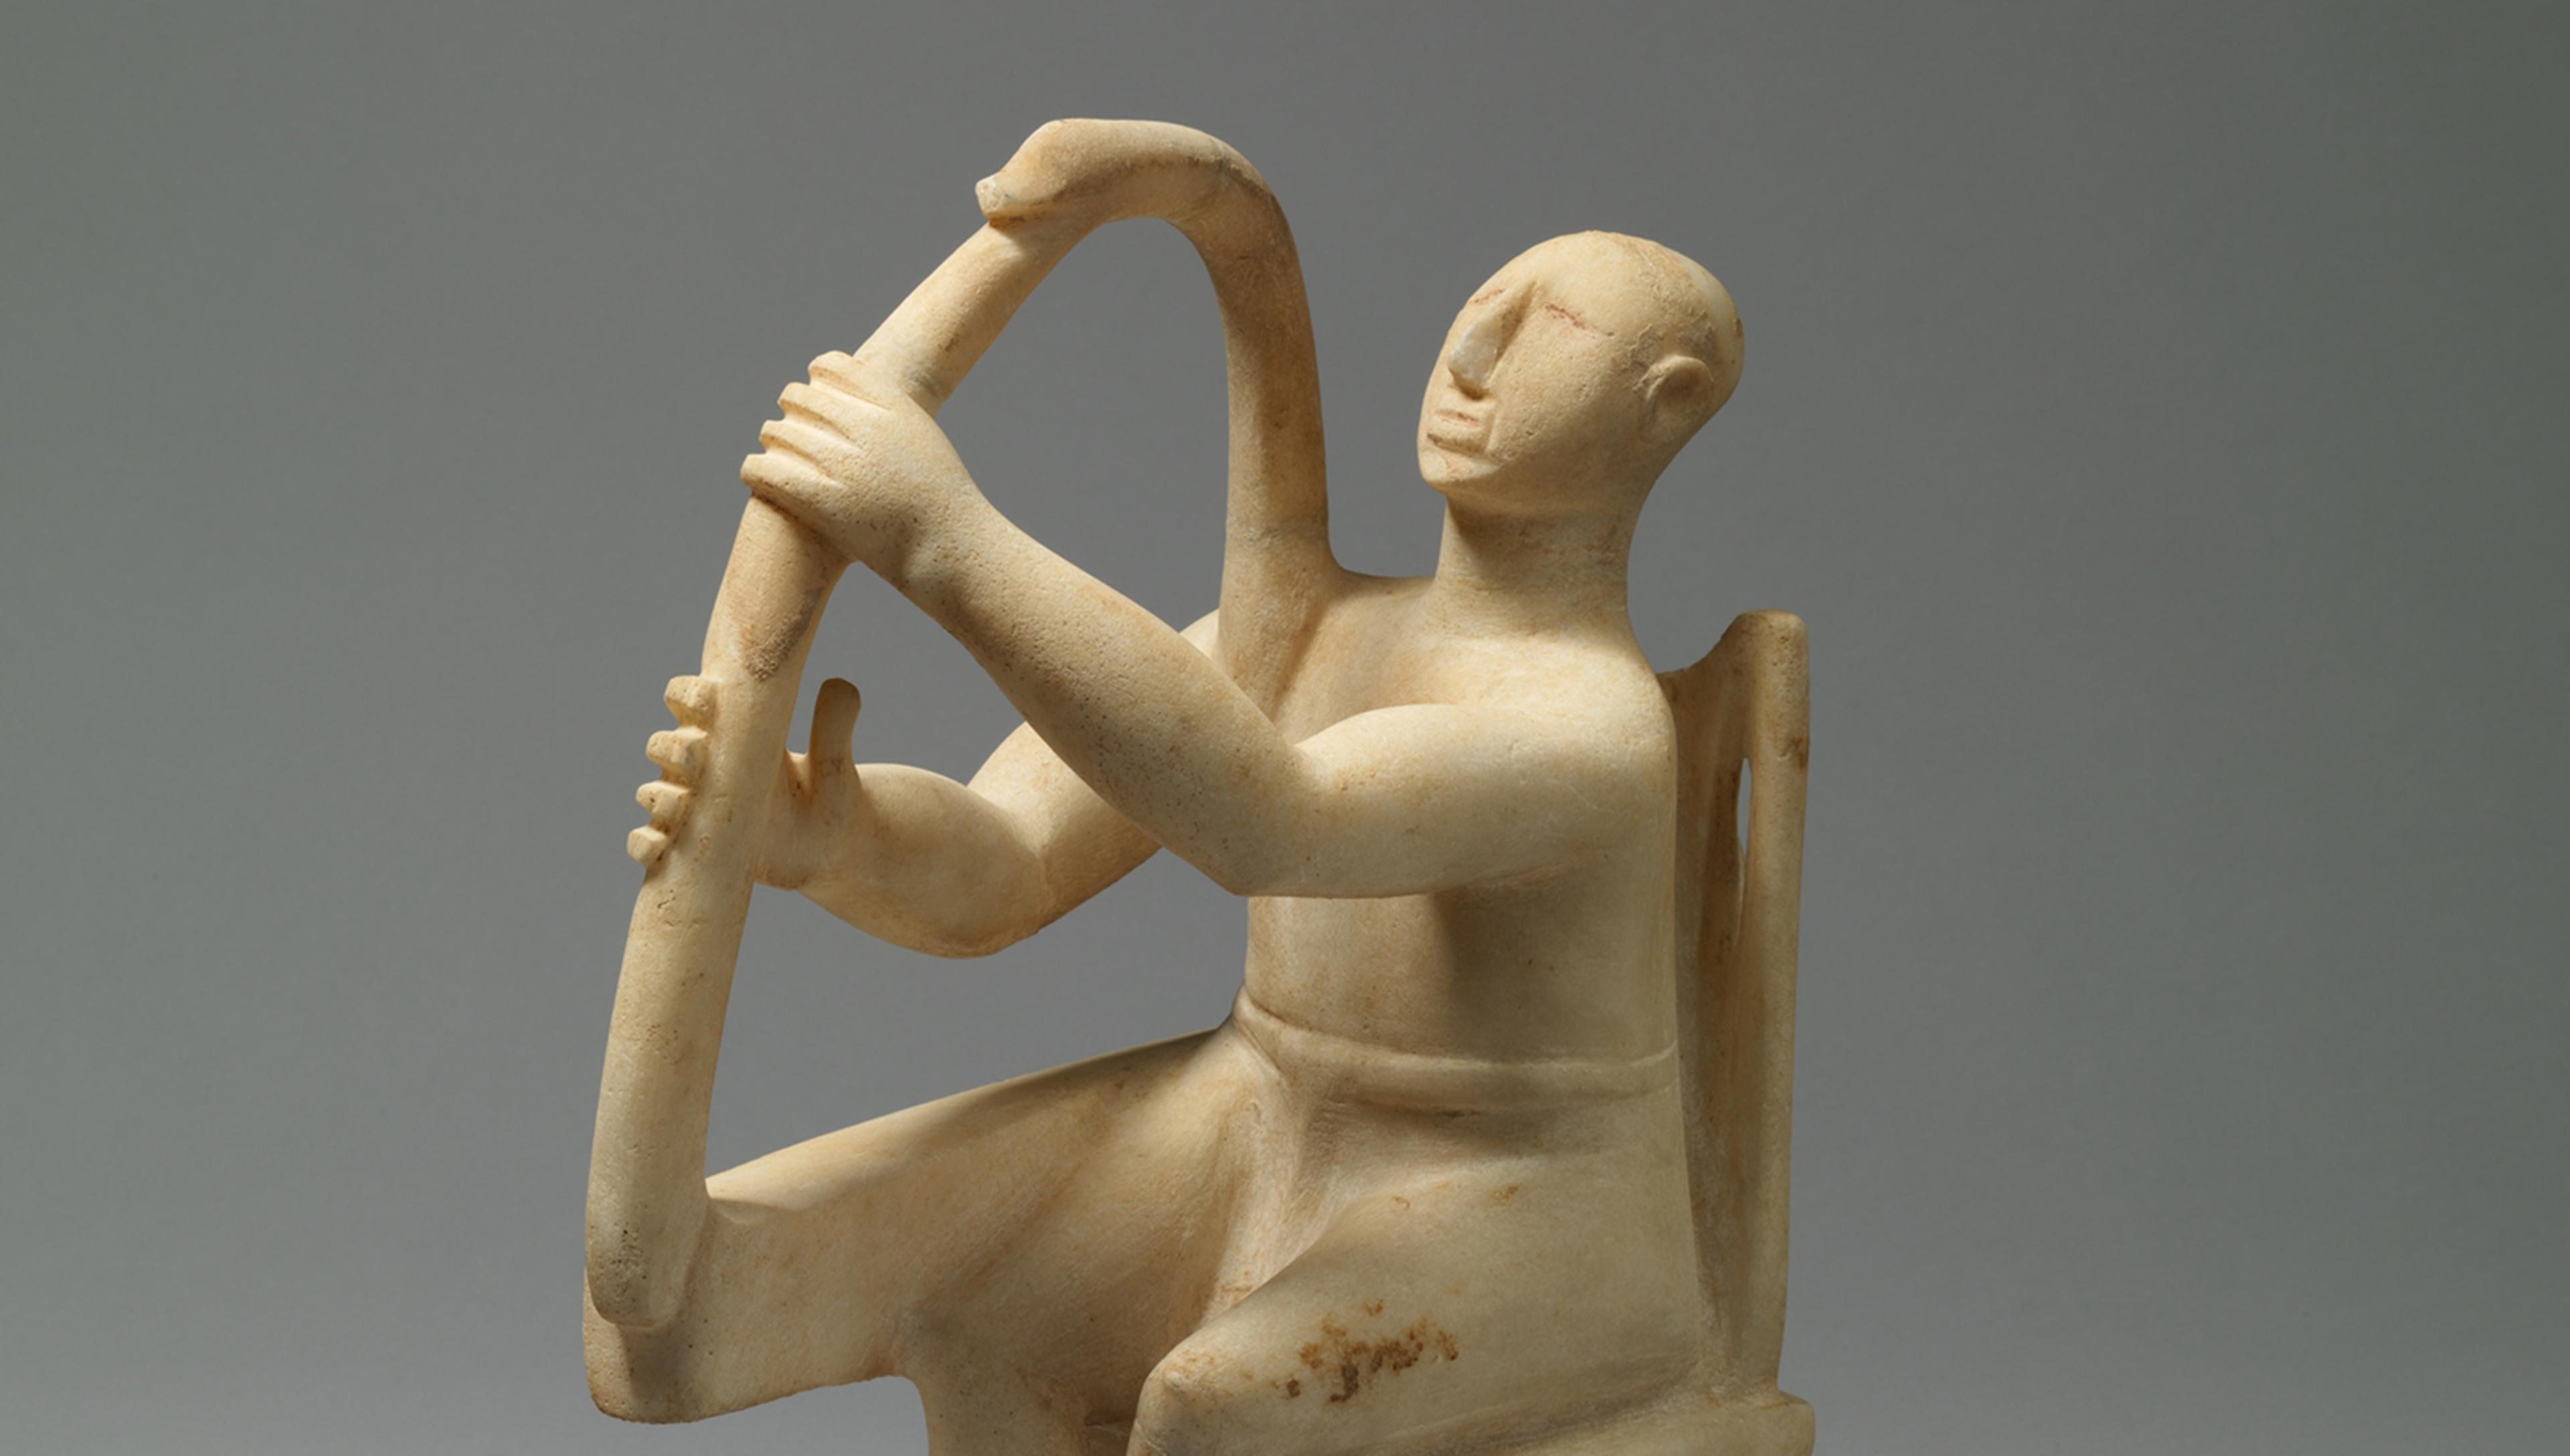 A marble figurine seated in a chair plays a harp